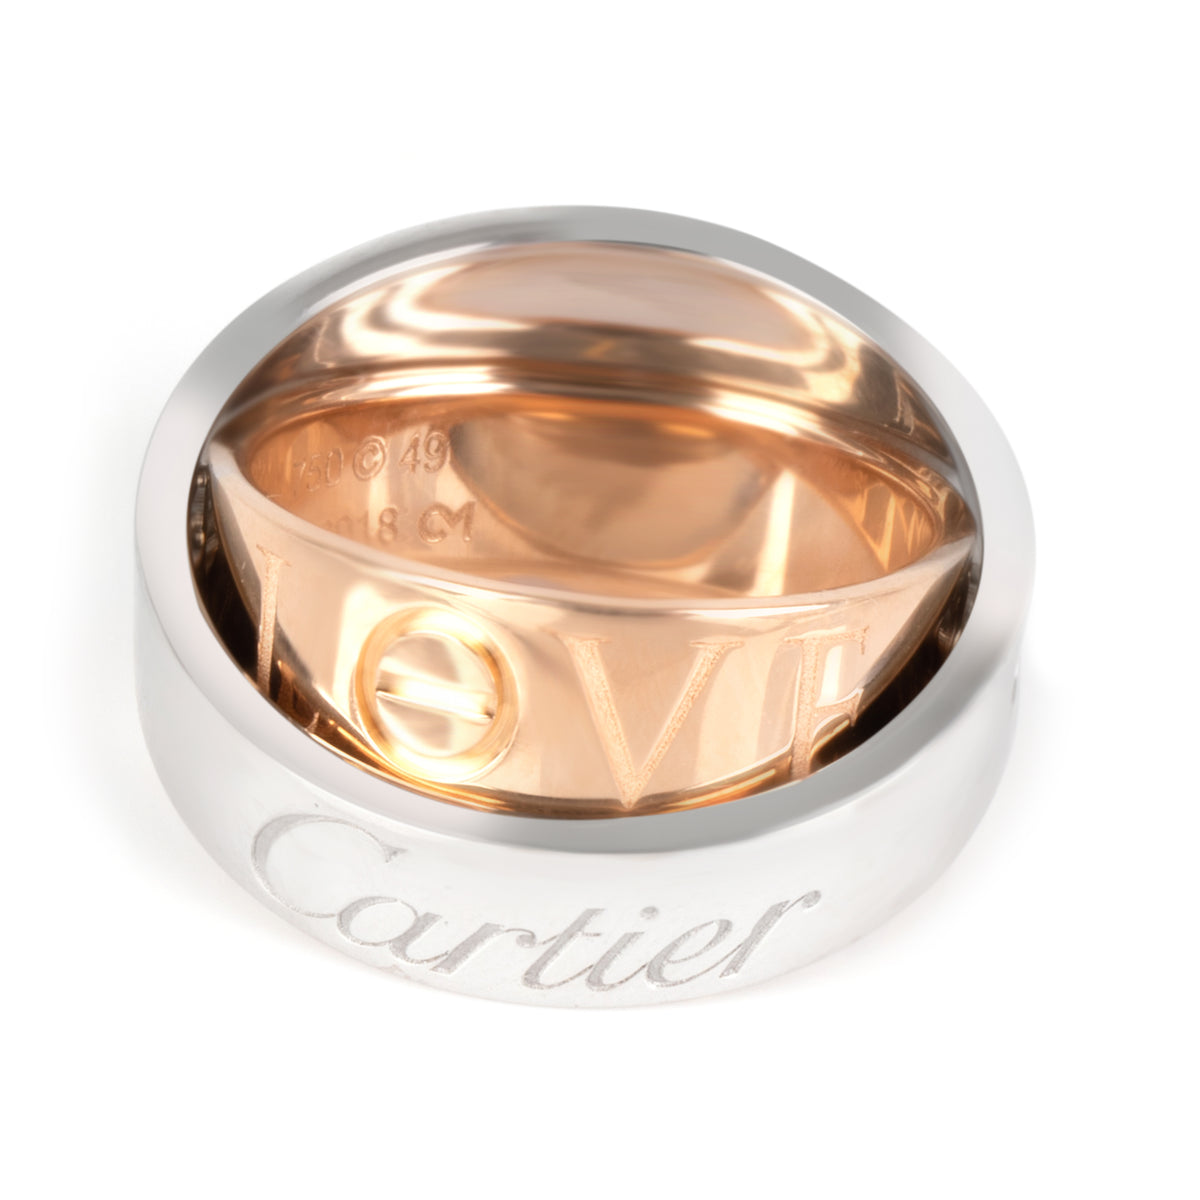 Cartier Secret Love Band in 18K Two Tone Gold